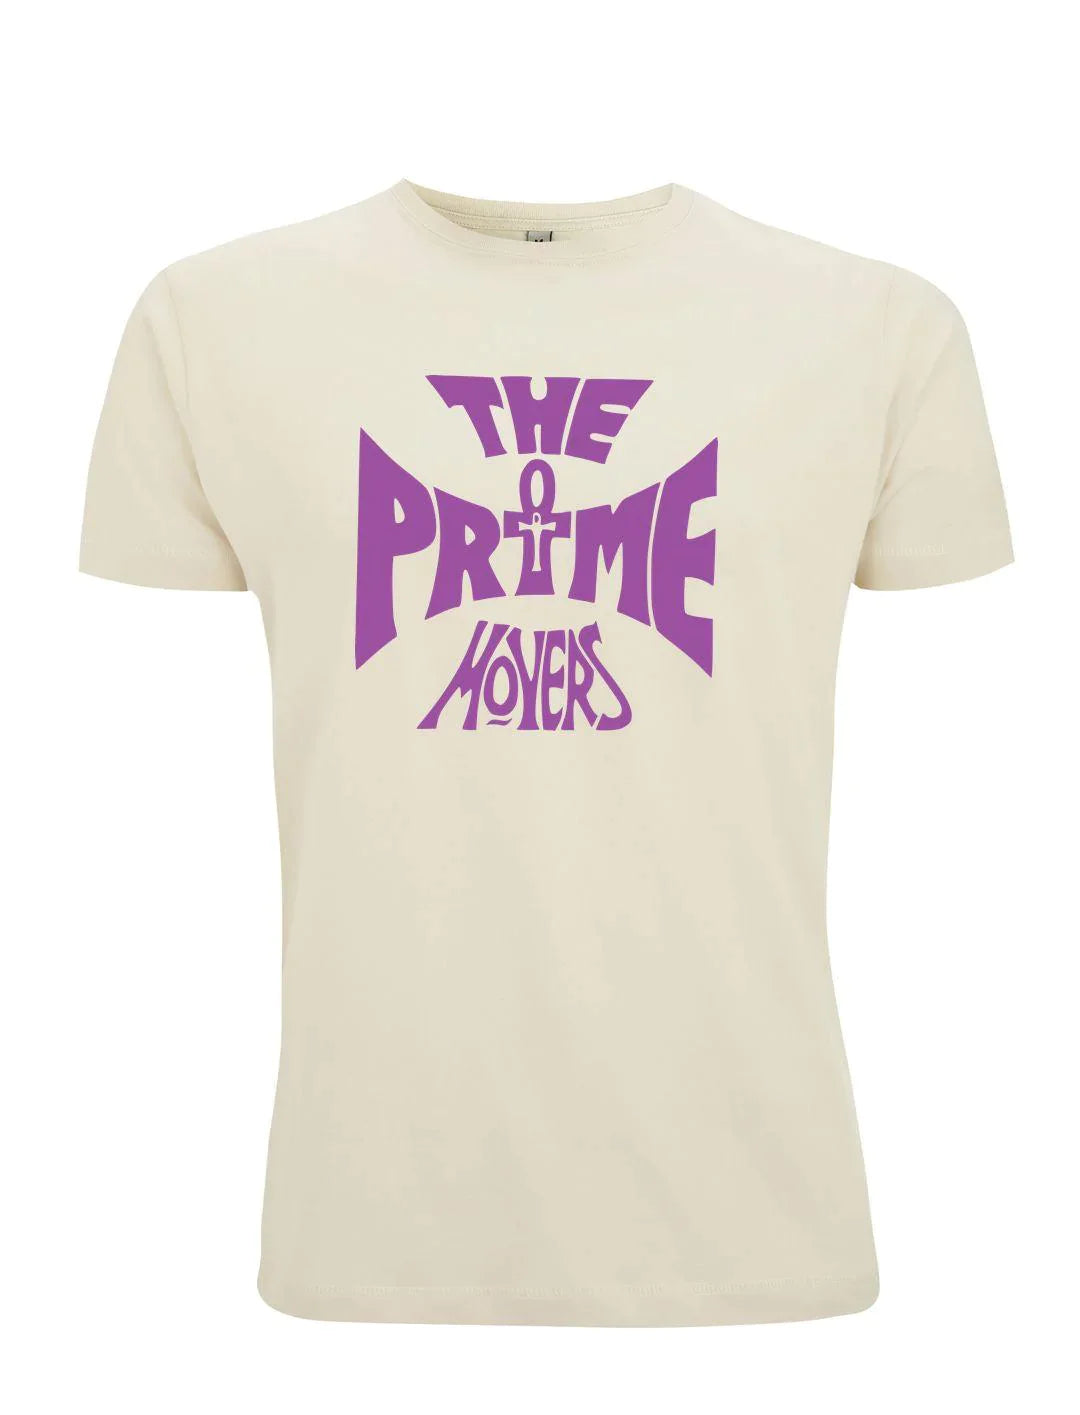 THE PRIME MOVERS: Logo T-Shirt Official Merchandise by Sound is Colour (Many Colours) - SOUND IS COLOUR